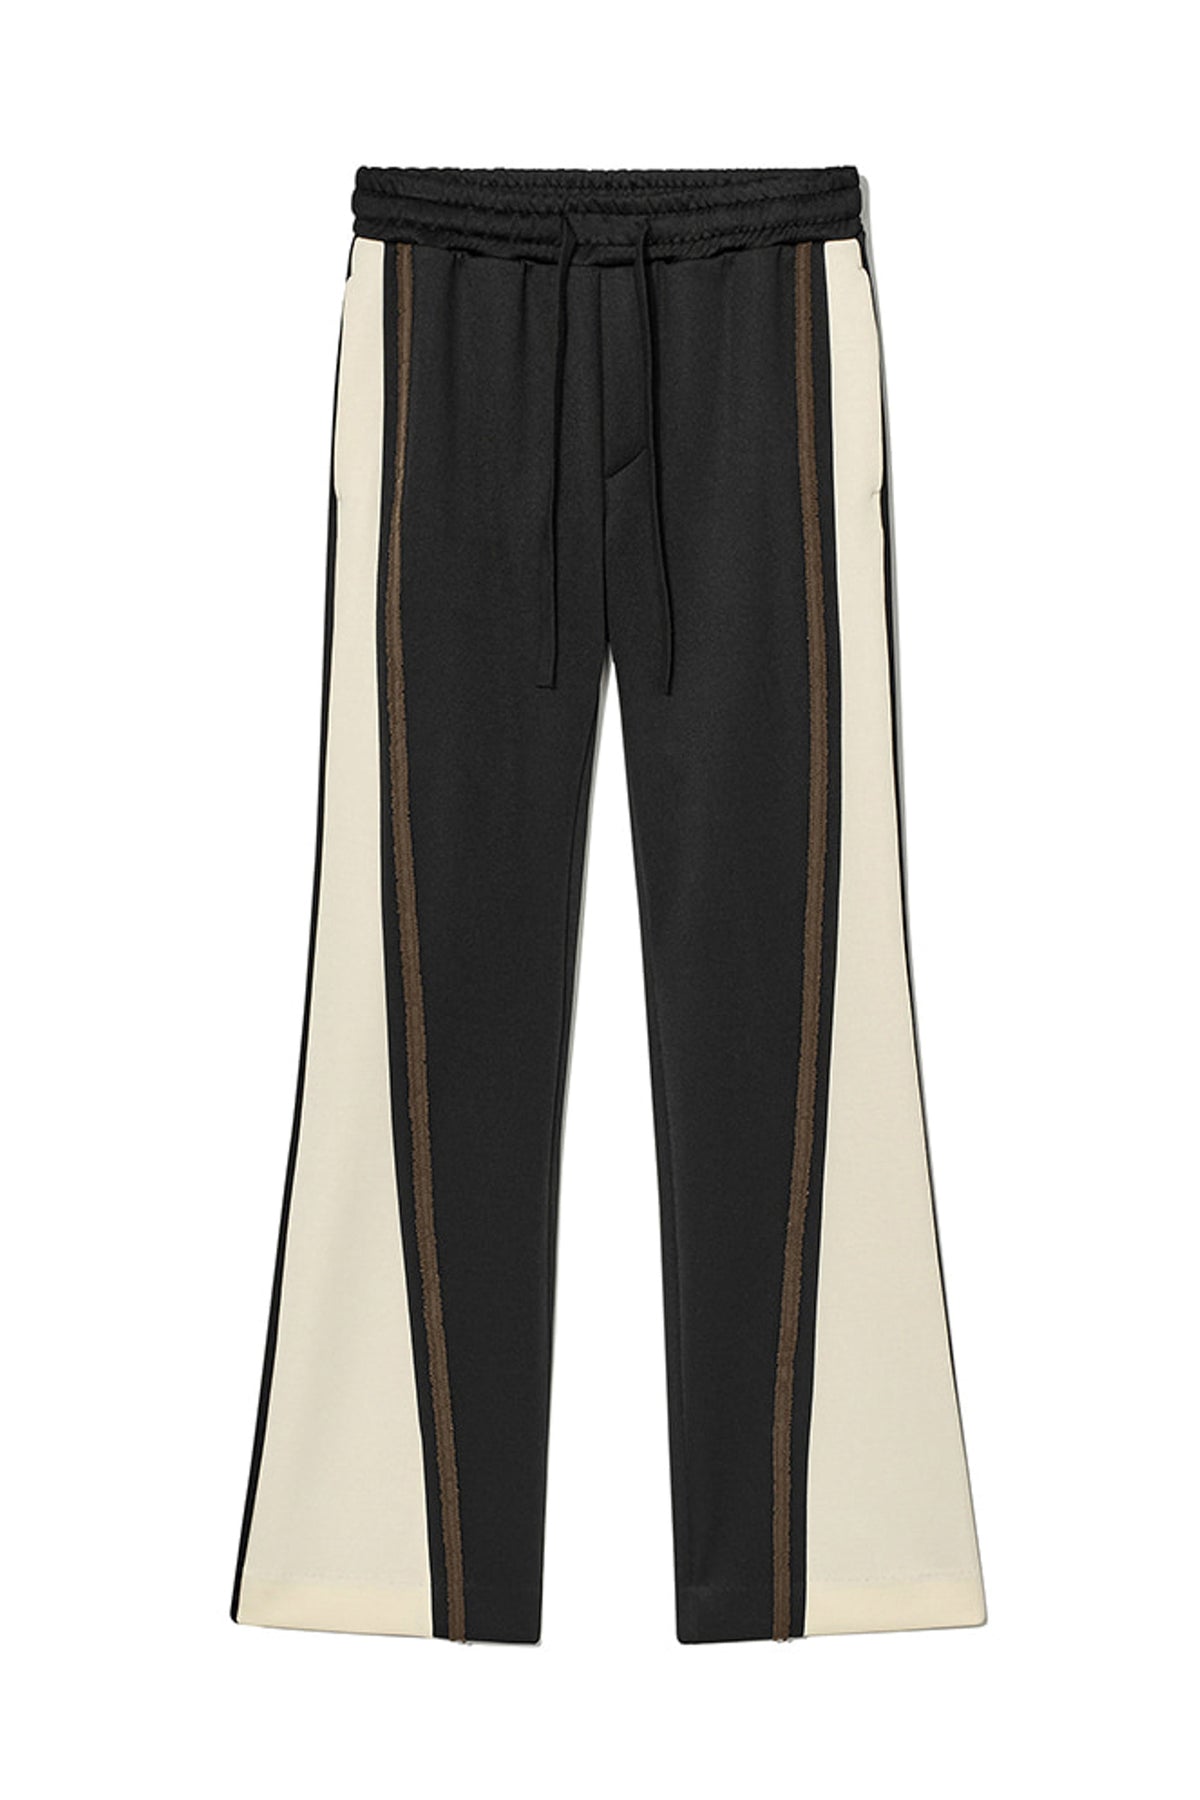 FLARED TAPE TRACK PANTS / BLK/CRM